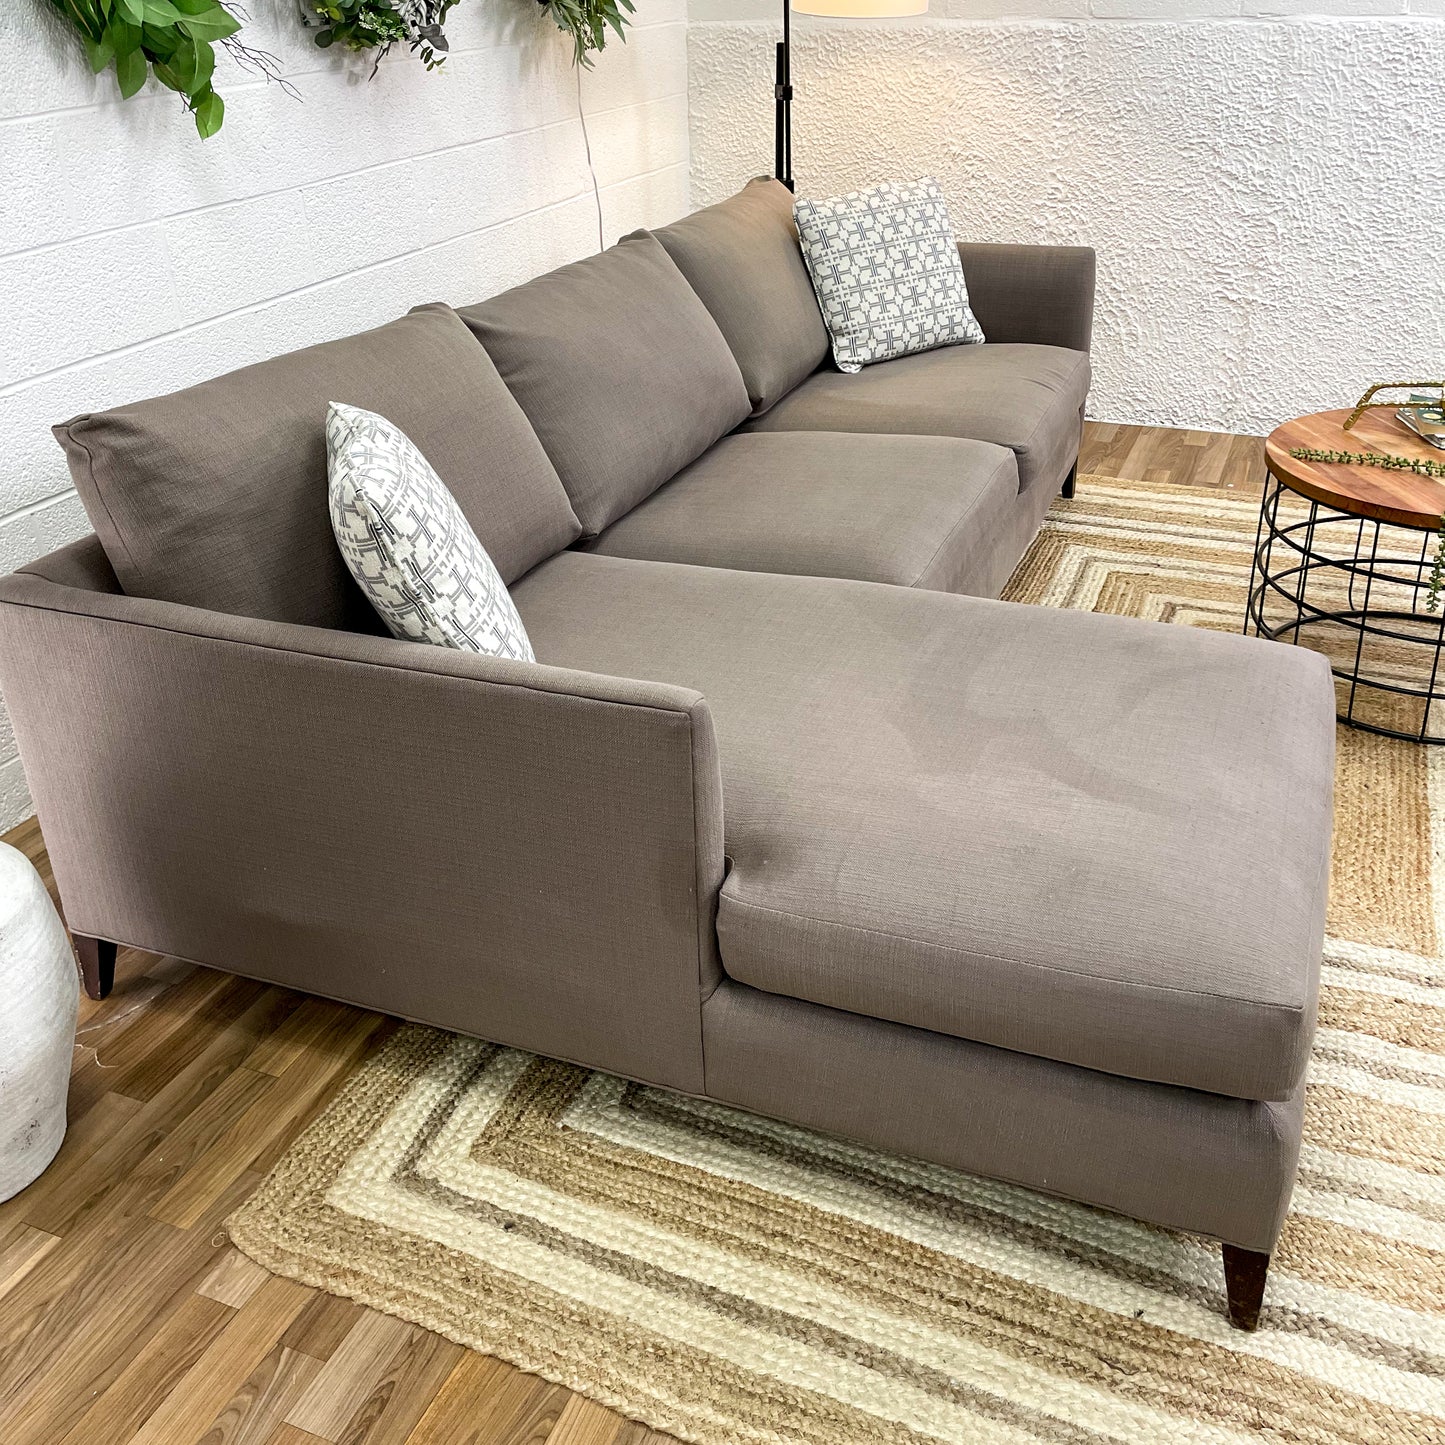 Crate & Barrel 2pc Sectional w/Chaise